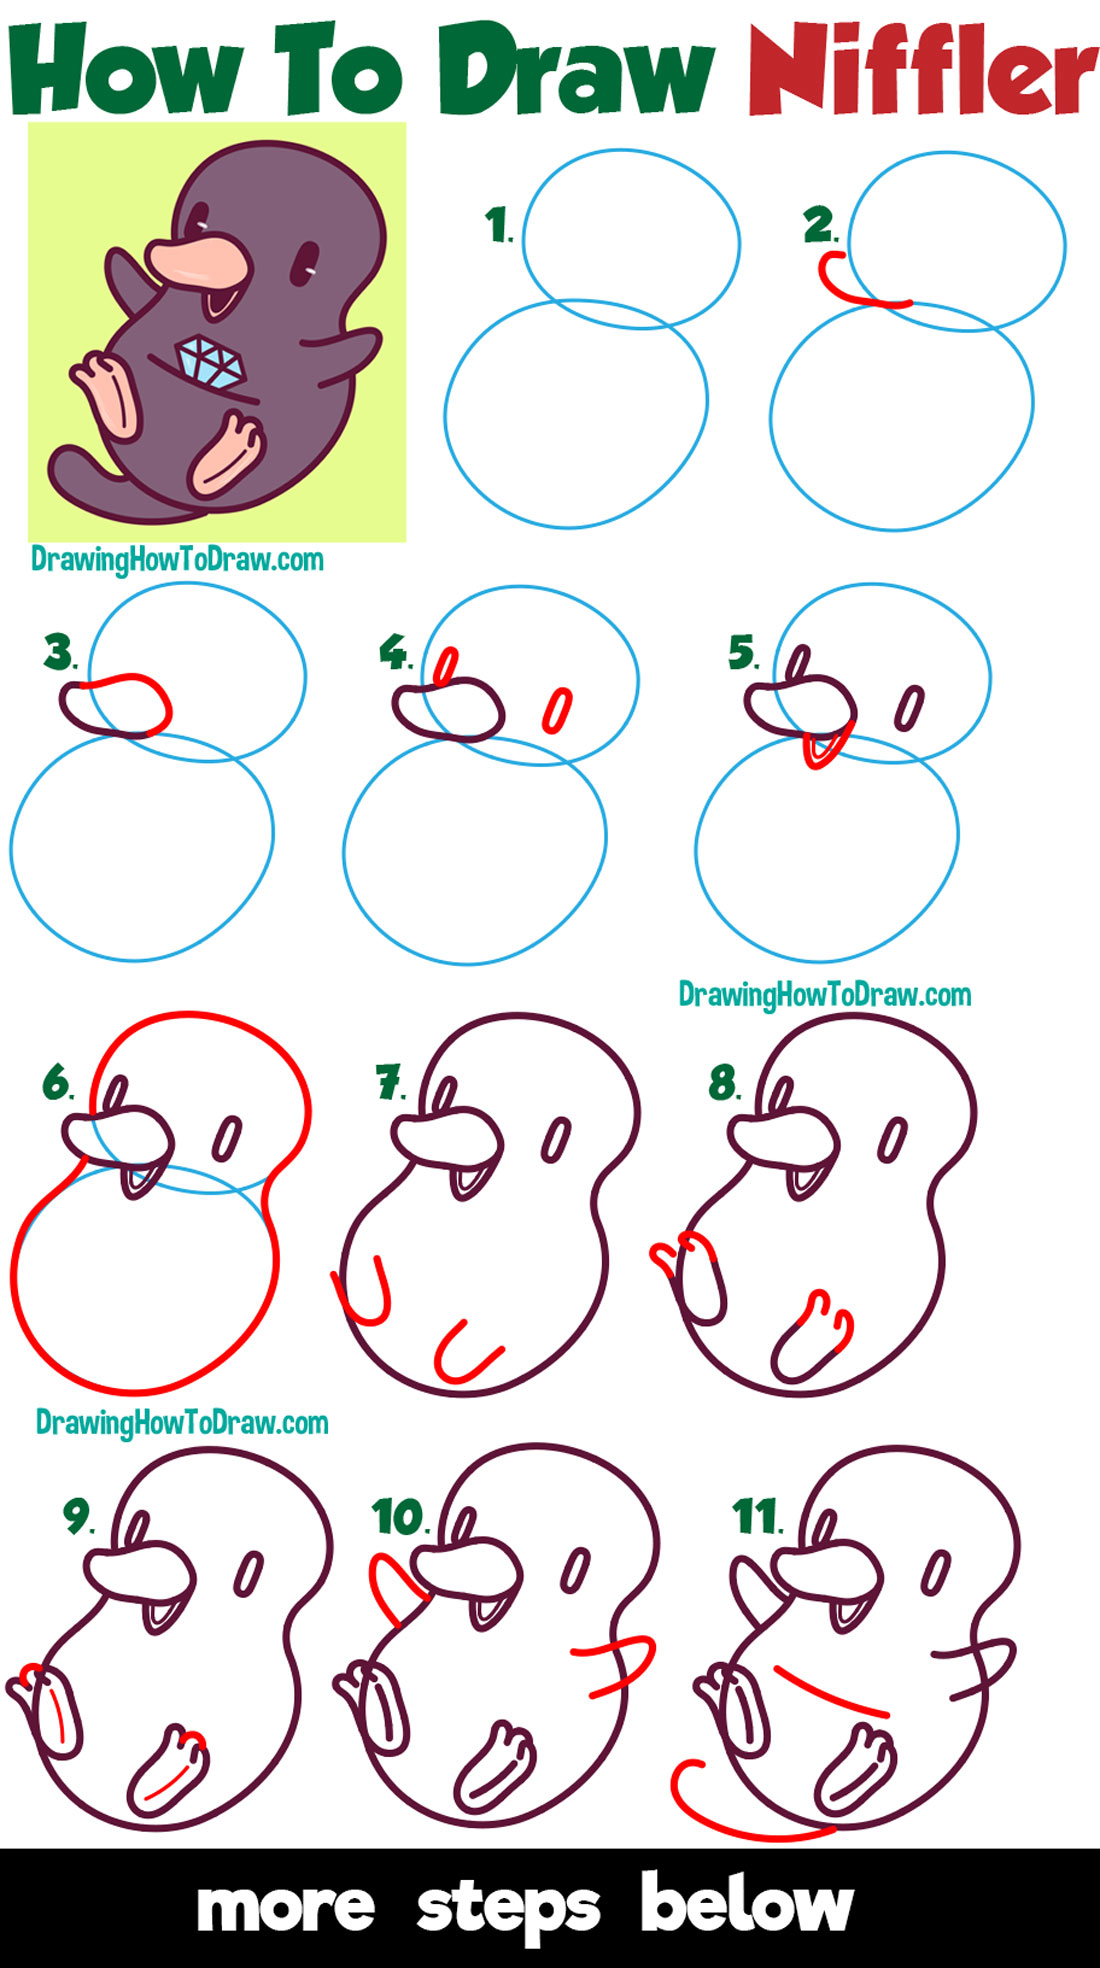 How to Draw a Cute Niffler from Fantastic Beasts (Chibi / Kawaii) Easy Step by Step Drawing Tutorial